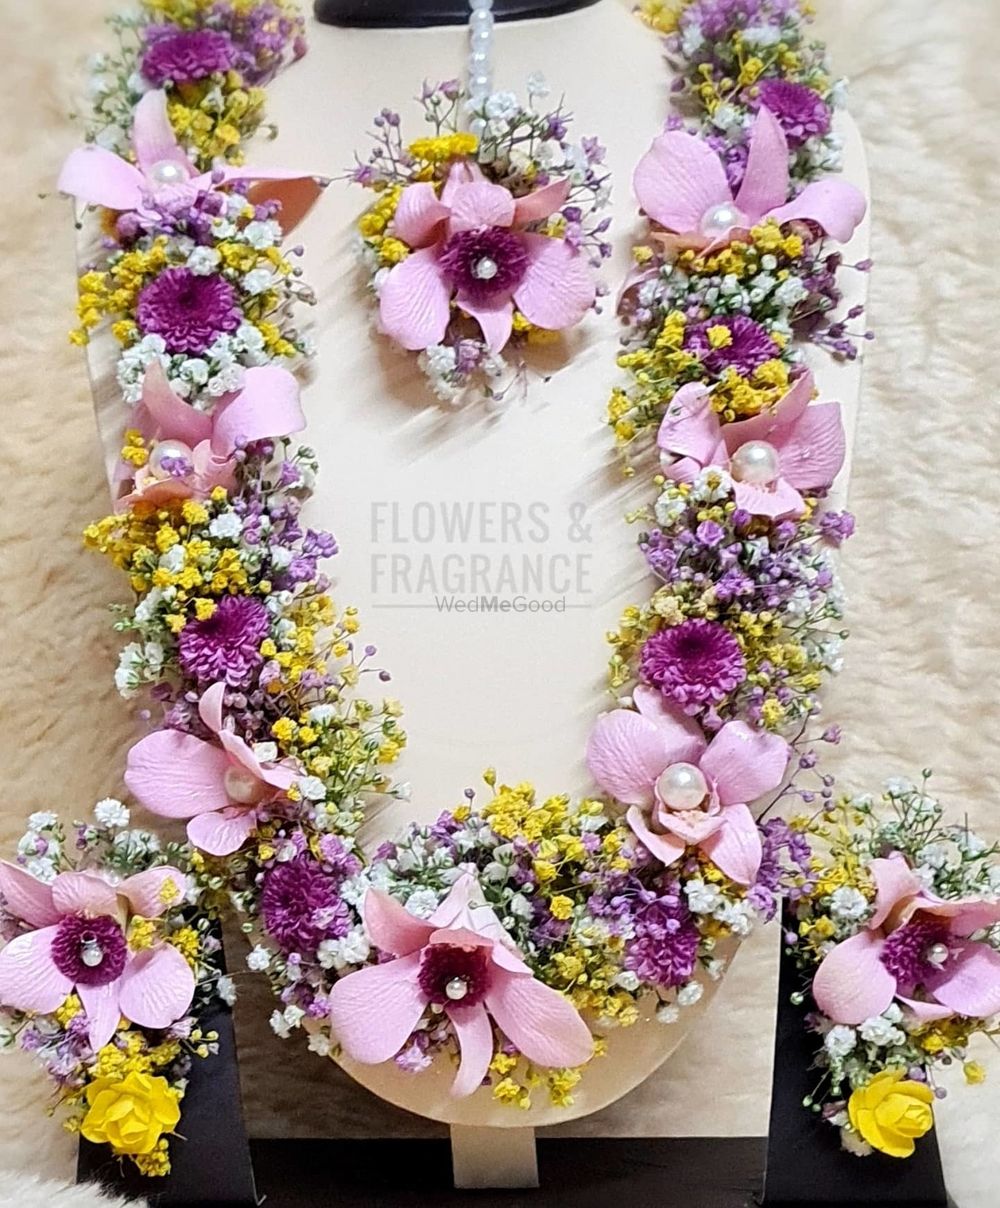 Photo From Floral Jewellery - By Flowers & Fragrance